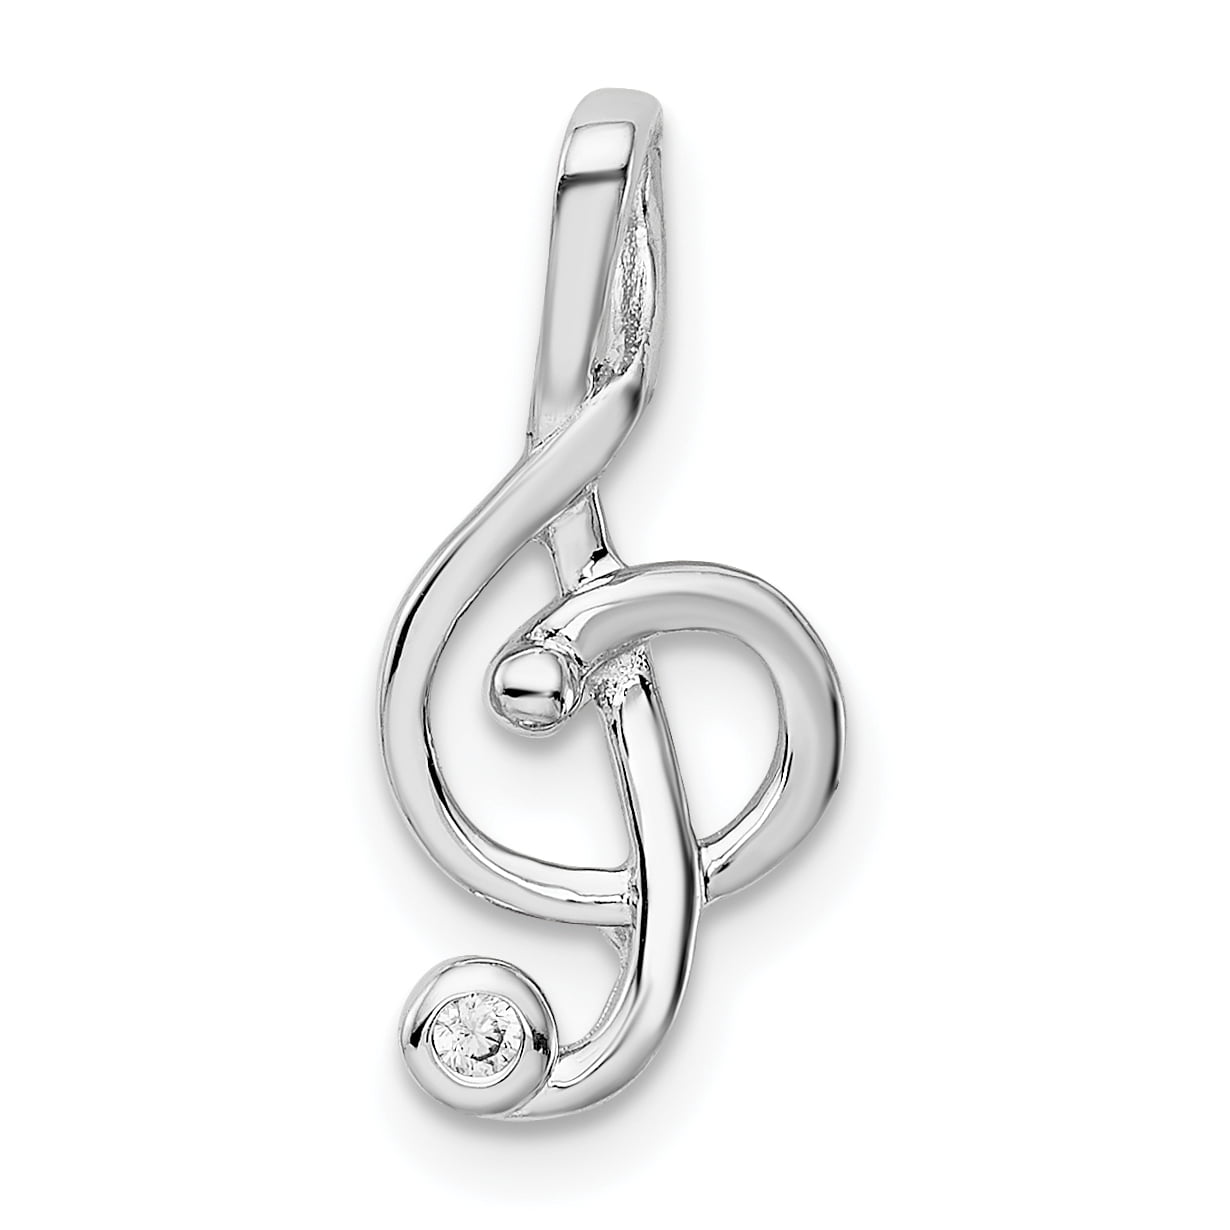 STERLING SILVER PENDANT SOLID 925 HUGE TREBLE CLEF NEW